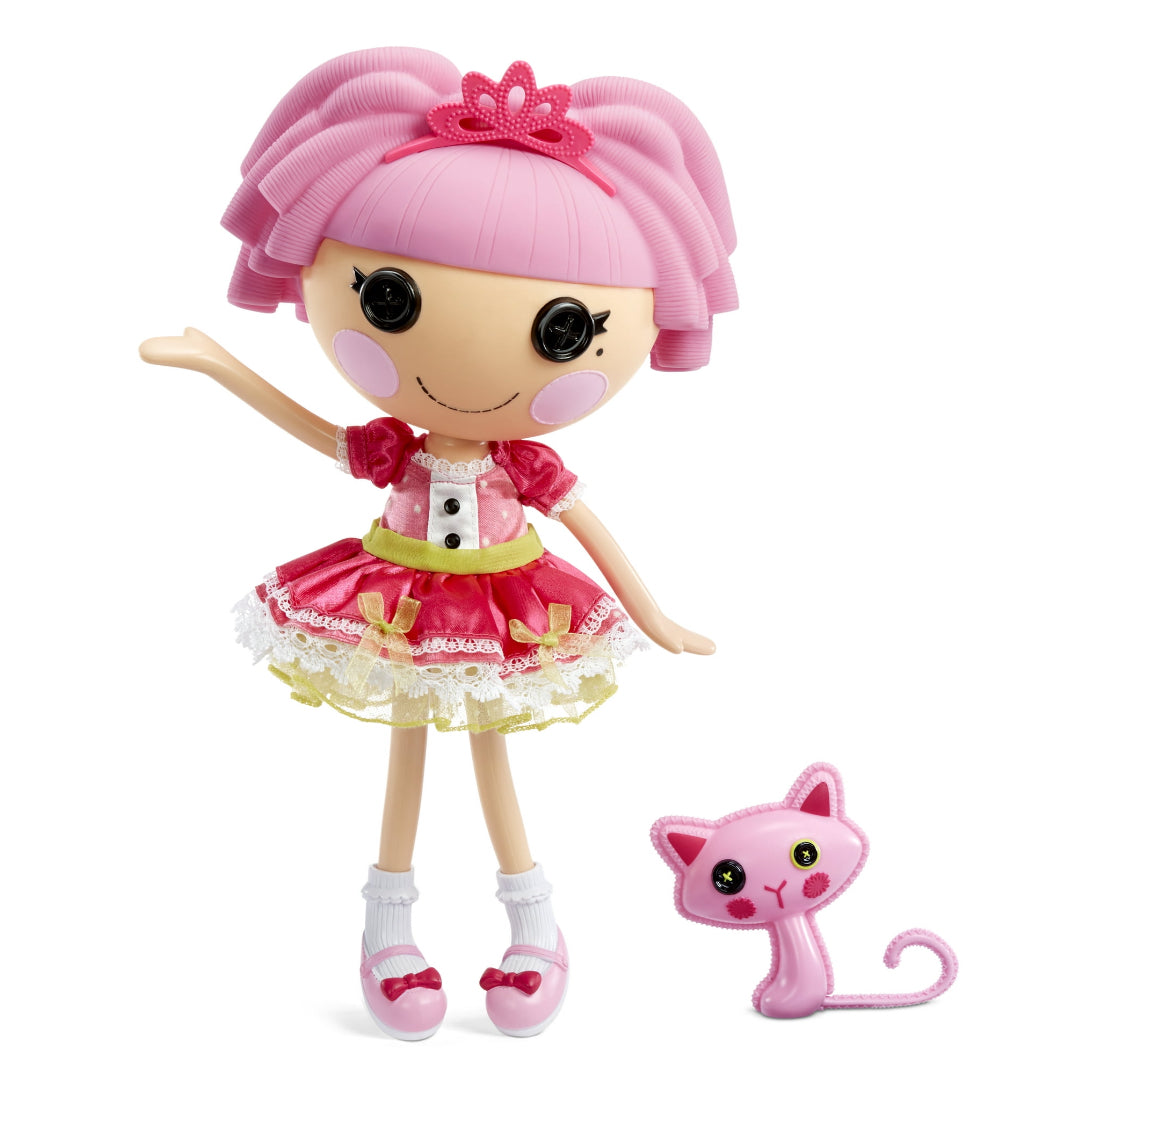 Lalaloopsy Doll Princess Jewel Sparkles with Pet Persian Cat Playset, 13" Doll with Changeable Pink Outfit and Shoes, in Reusable Play House Package